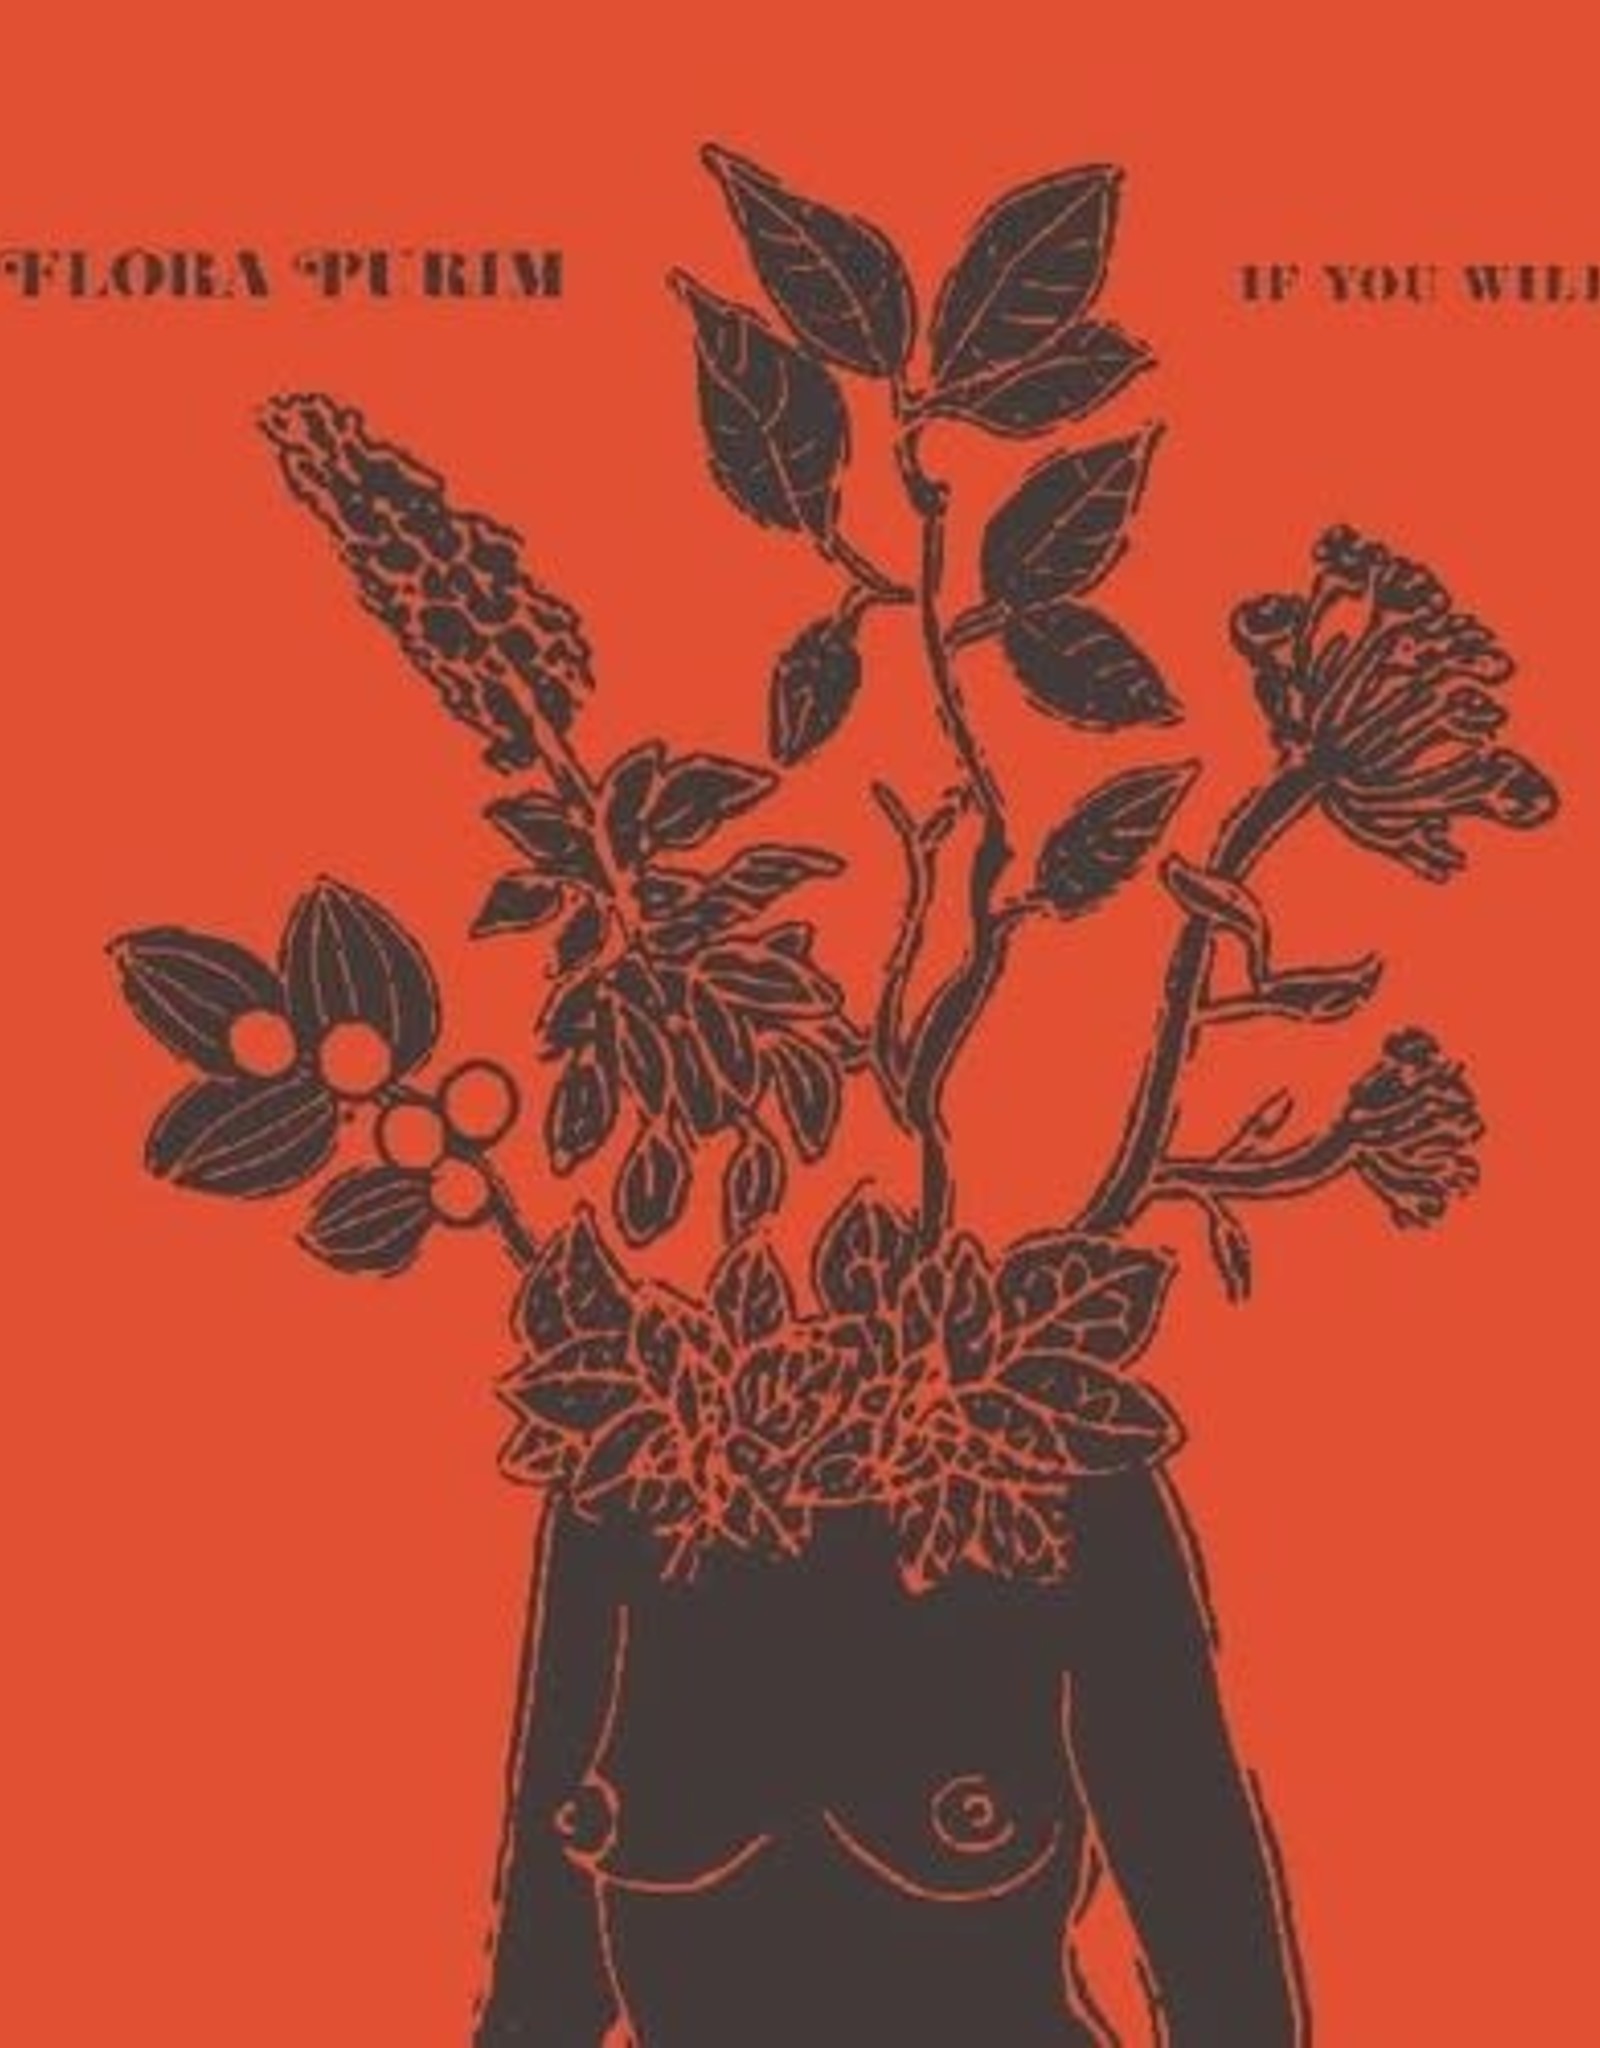 Flora Purim - If You Will